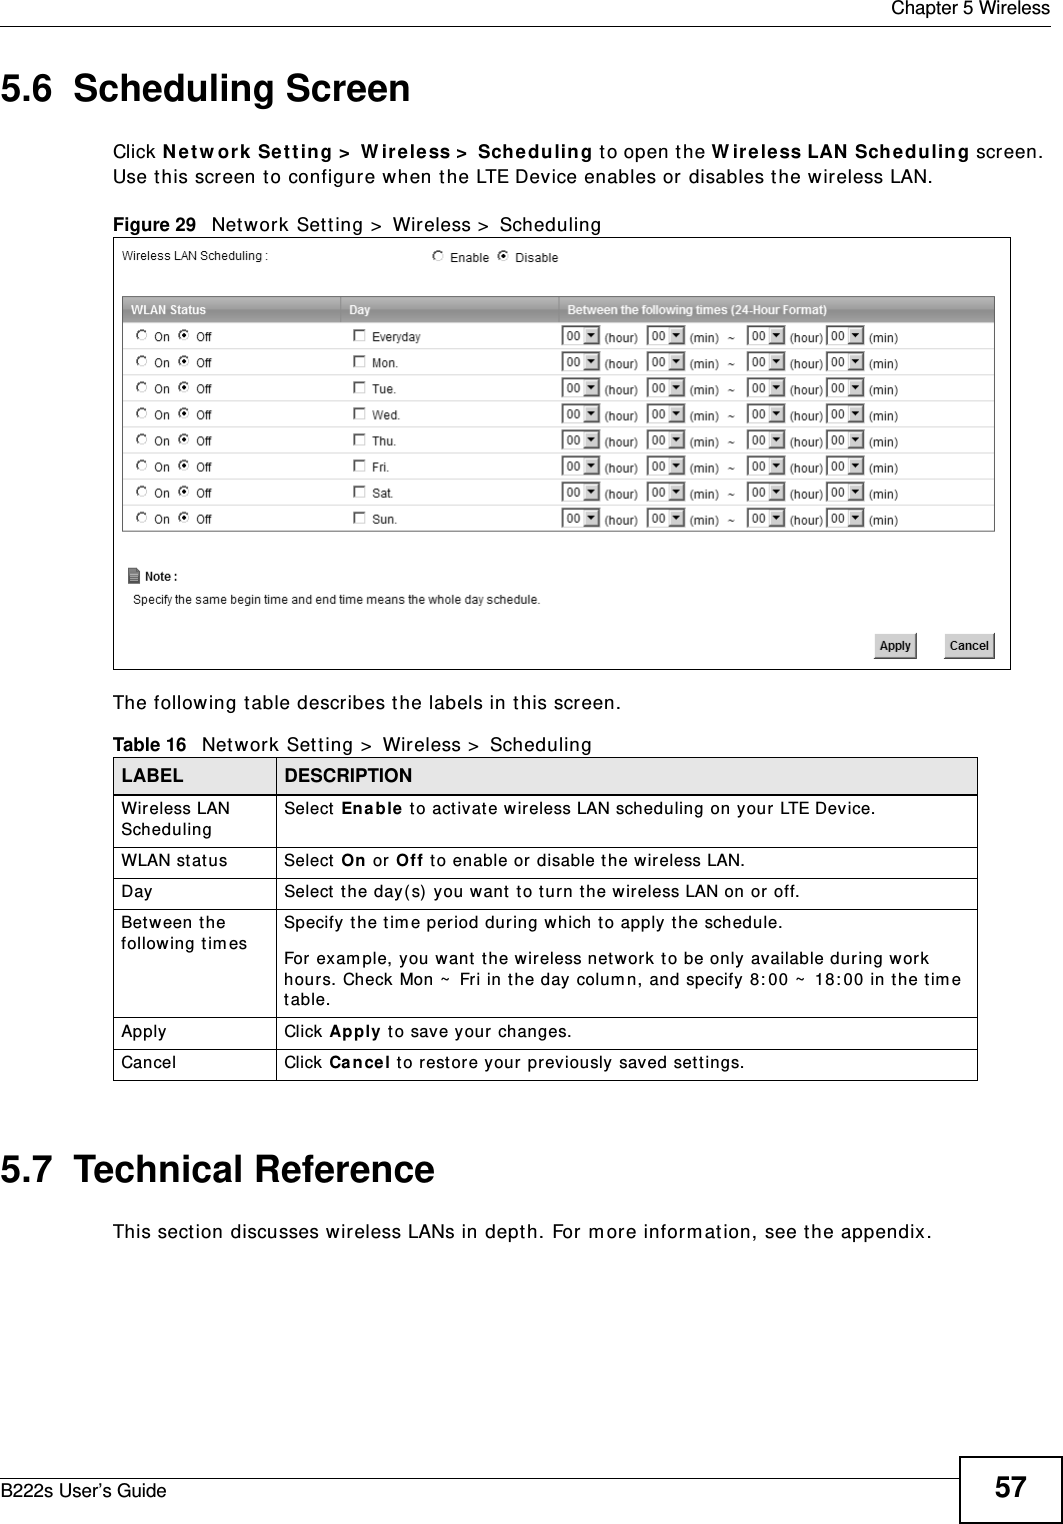  Chapter 5 WirelessB222s User’s Guide 575.6  Scheduling Screen Click Net w or k  Set t ing &gt;  W irele ss &gt;  Sch e duling  t o open t he W ir e less LAN  Schedu lin g screen. Use t his screen t o configure when t he LTE Device enables or disables t he wireless LAN. Figure 29   Net work Set ting &gt;  Wireless &gt;  SchedulingThe following t able describes t he labels in t his screen.5.7  Technical ReferenceThis sect ion discusses wireless LANs in depth. For m ore inform at ion, see t he appendix.Table 16   Network Sett ing &gt;  Wir eless &gt;  SchedulingLABEL DESCRIPTIONWireless LAN SchedulingSelect Ena ble t o act ivate wireless LAN scheduling on your LTE Device.WLAN stat us Select  On or Off t o enable or disable t he wireless LAN.Day Select the day(s) you want to t urn t he wir eless LAN on or off.Bet w een t he following tim esSpecify t he t im e period during which to apply t he schedule.For exam ple, you want  t he wireless netw ork t o be only available during w ork hours. Check Mon ~  Fri in the day colum n, and specify 8: 00 ~  18: 00 in the tim e table.Apply Click Apply  t o save your changes.Cancel Click Can cel to restore your previously saved sett ings.